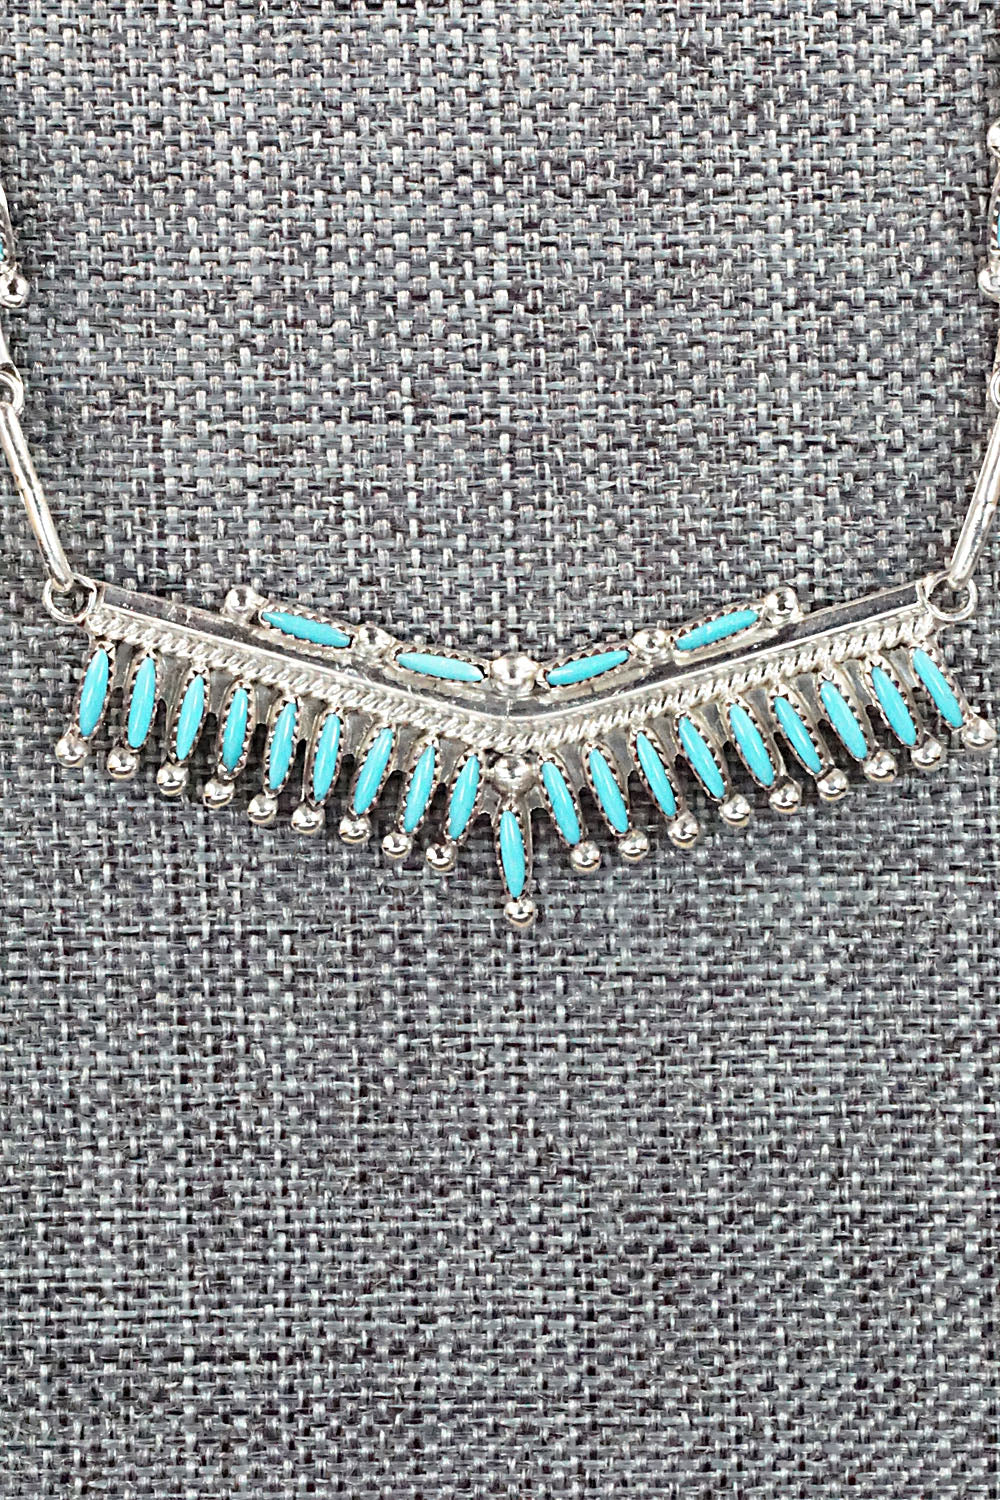 Turquoise & Sterling Silver Necklace and Earrings Set - Rena Cachini